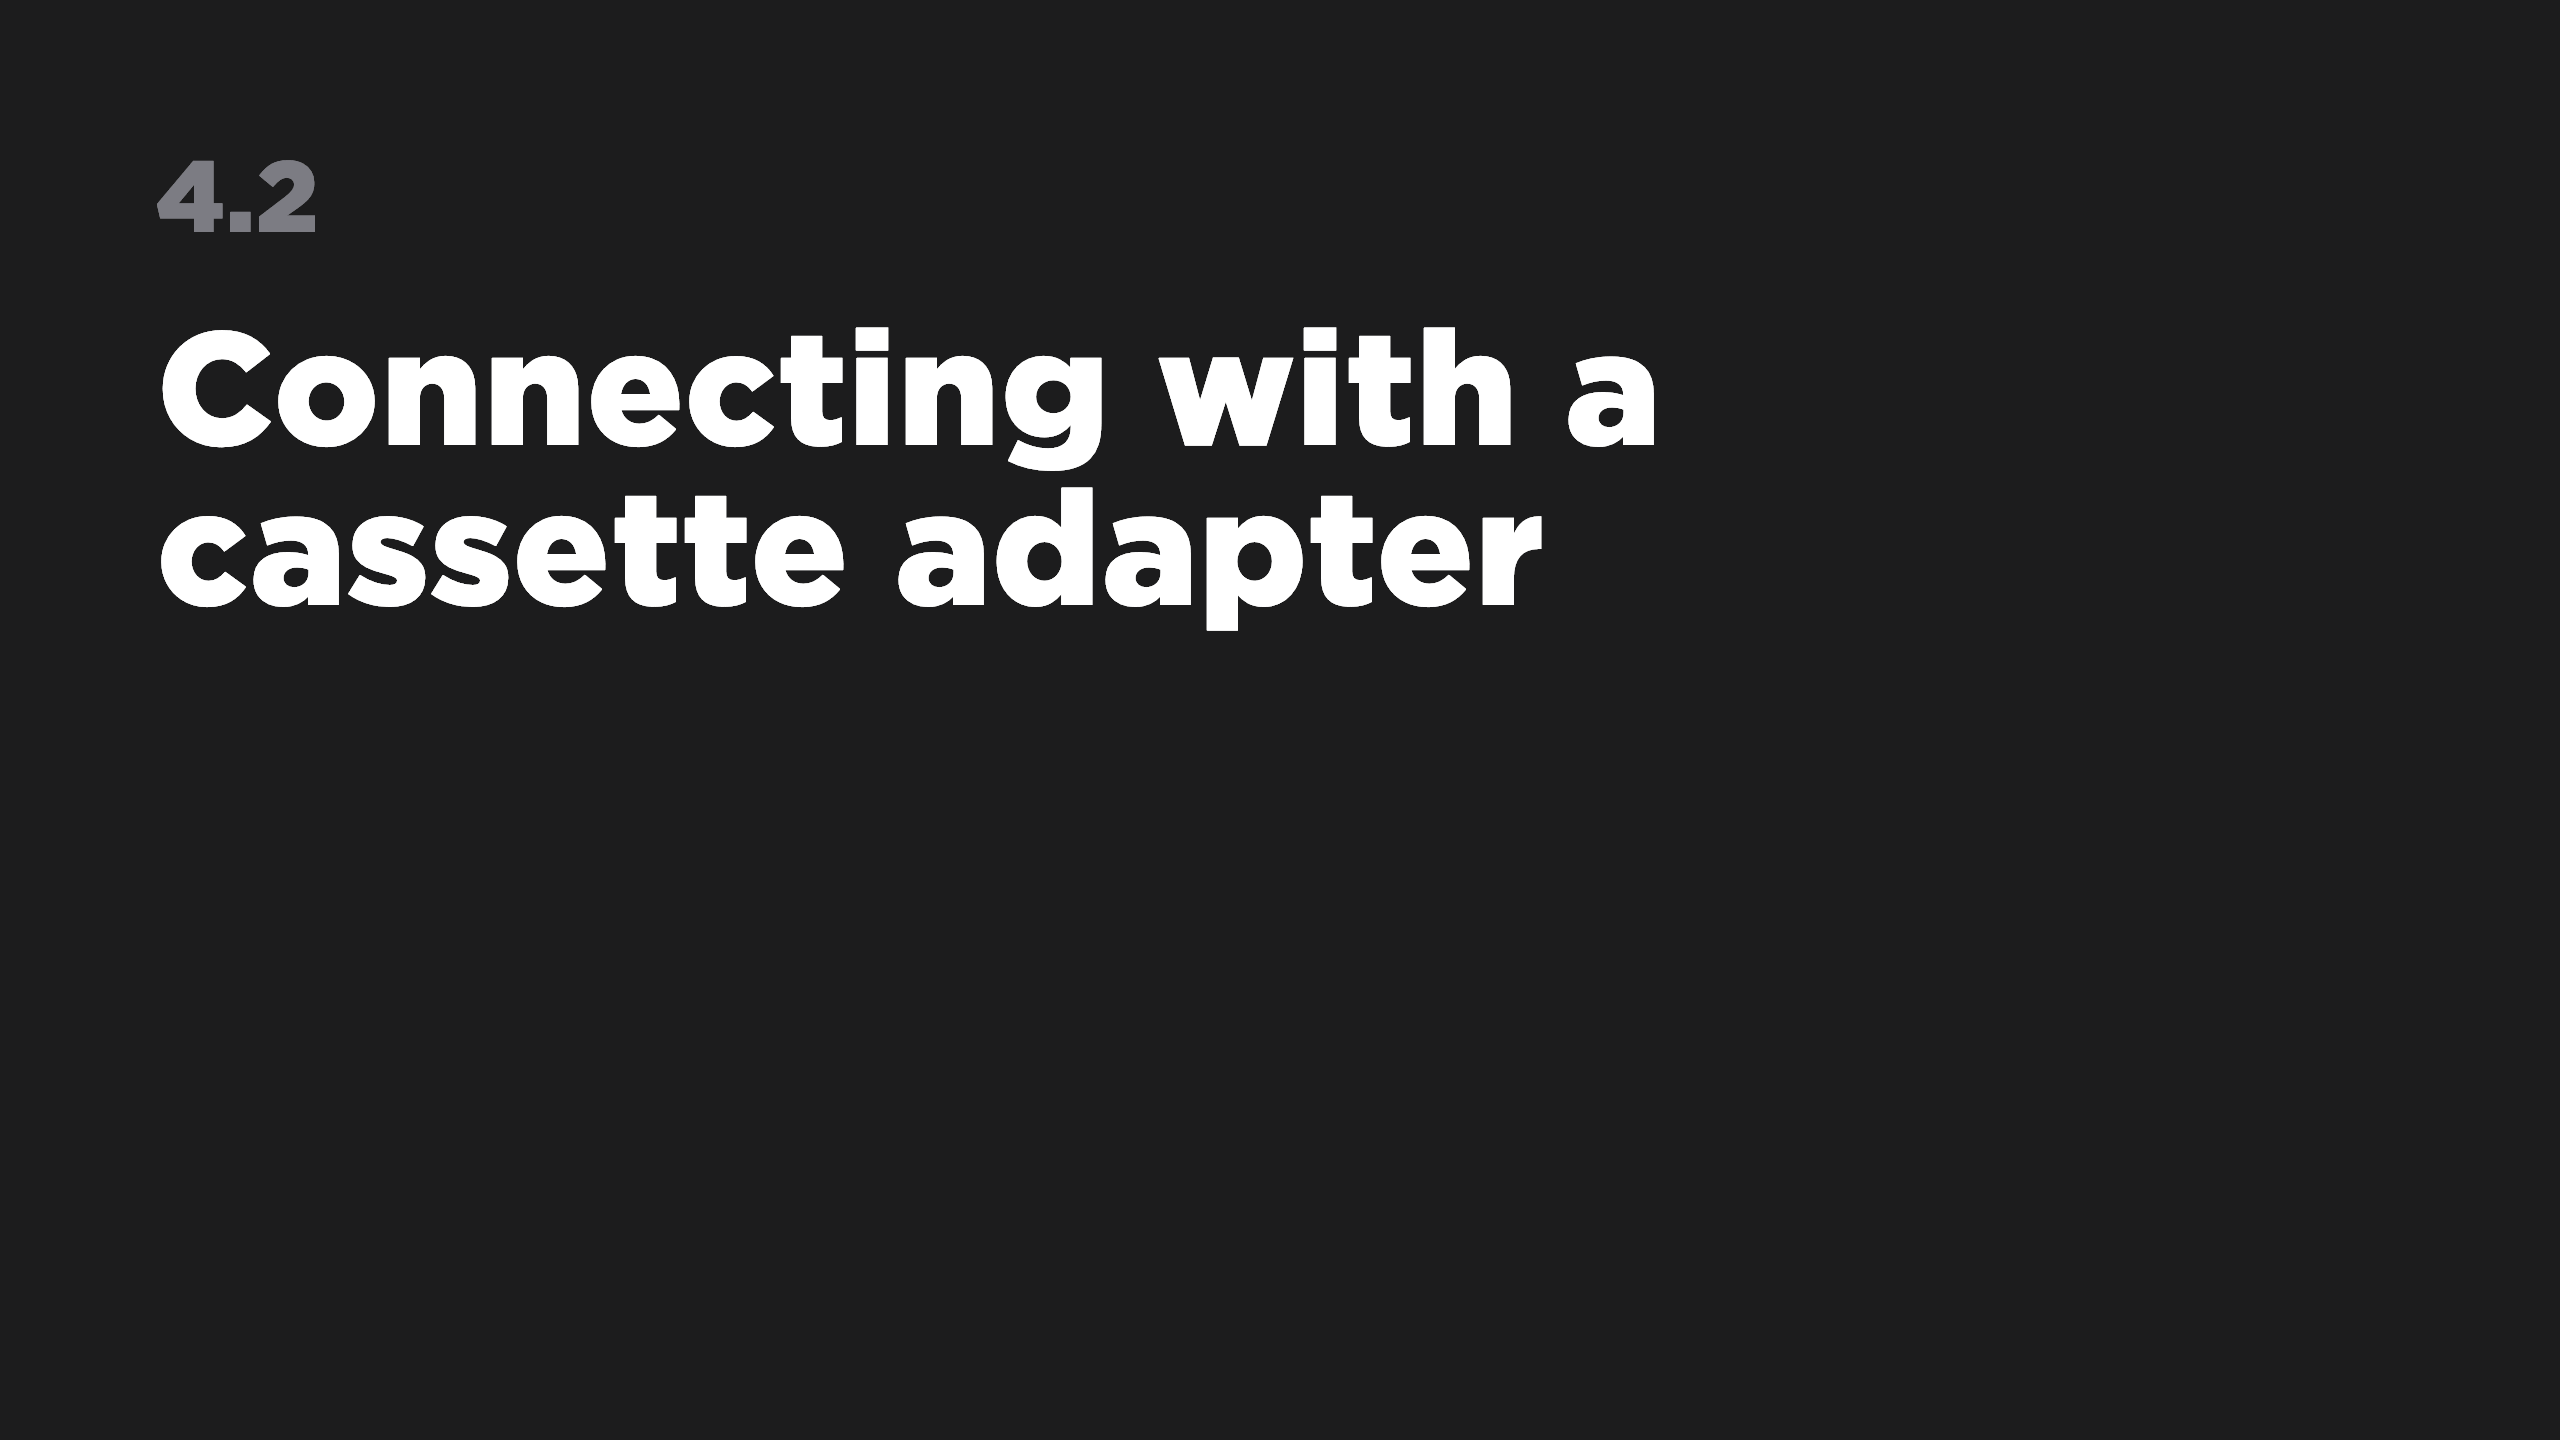 4.2 Connecting with a cassette adapter